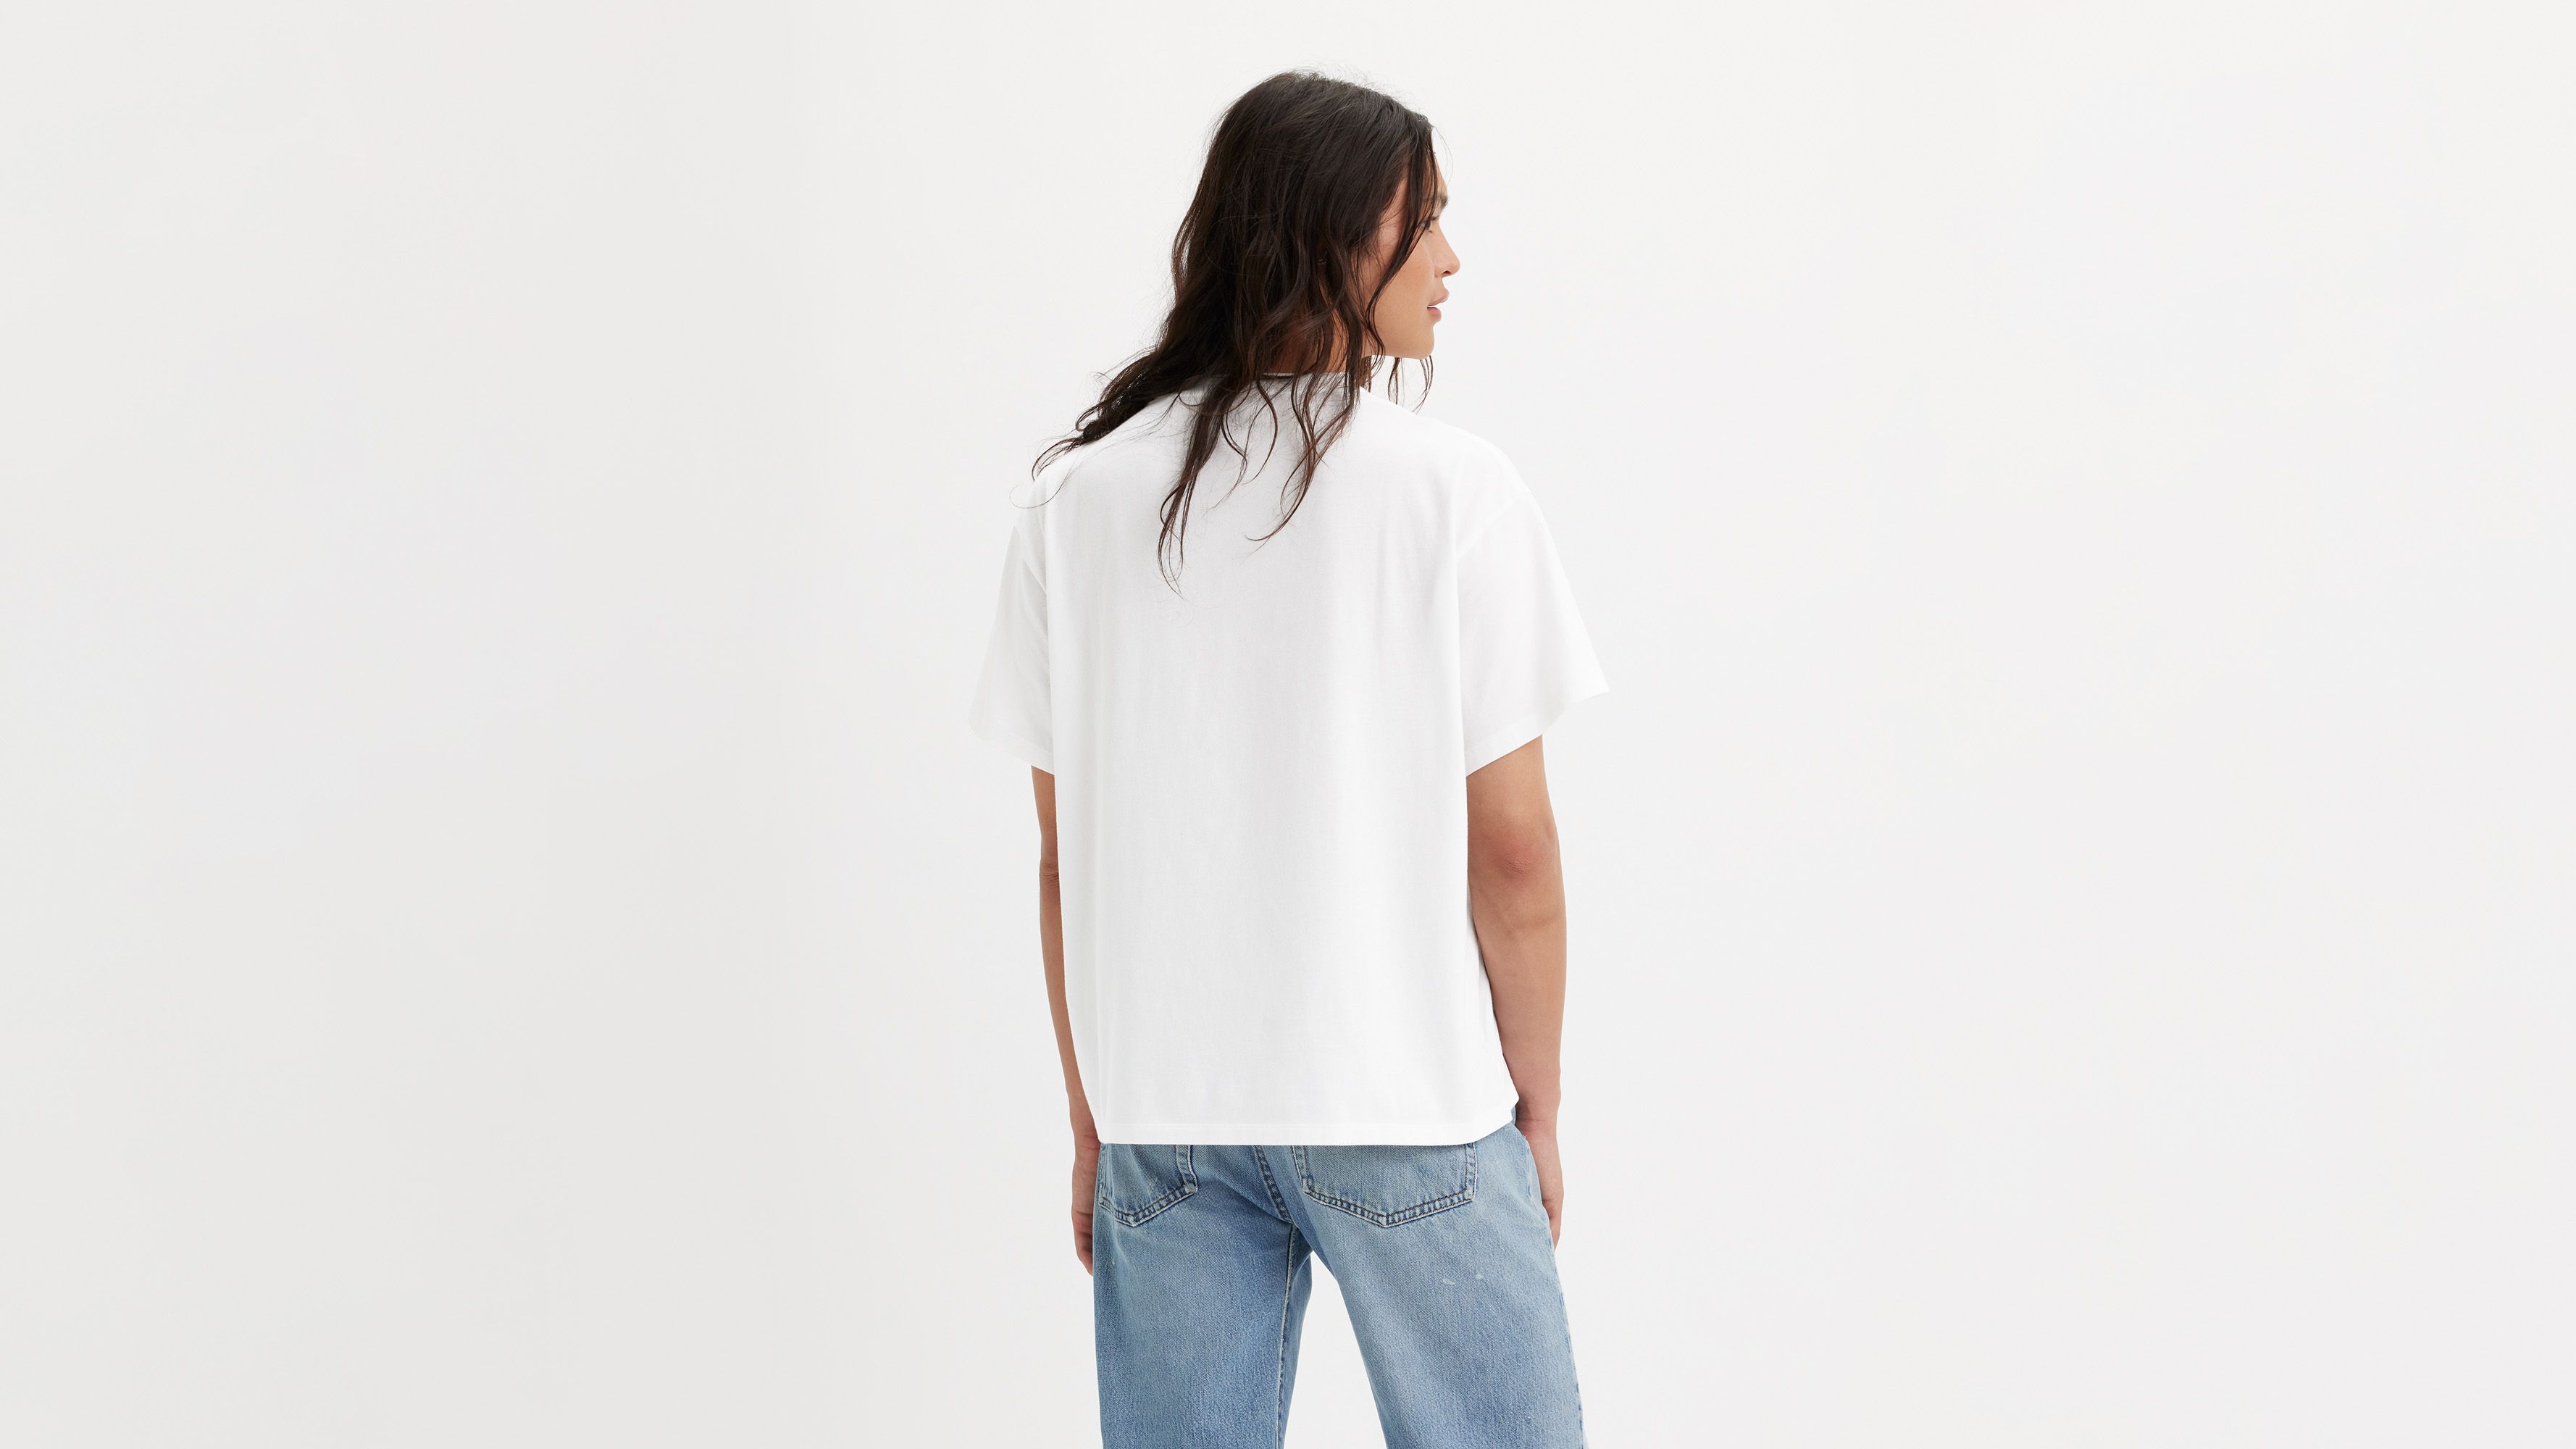 Levi's® Pride Cinched Short Stack T-Shirt